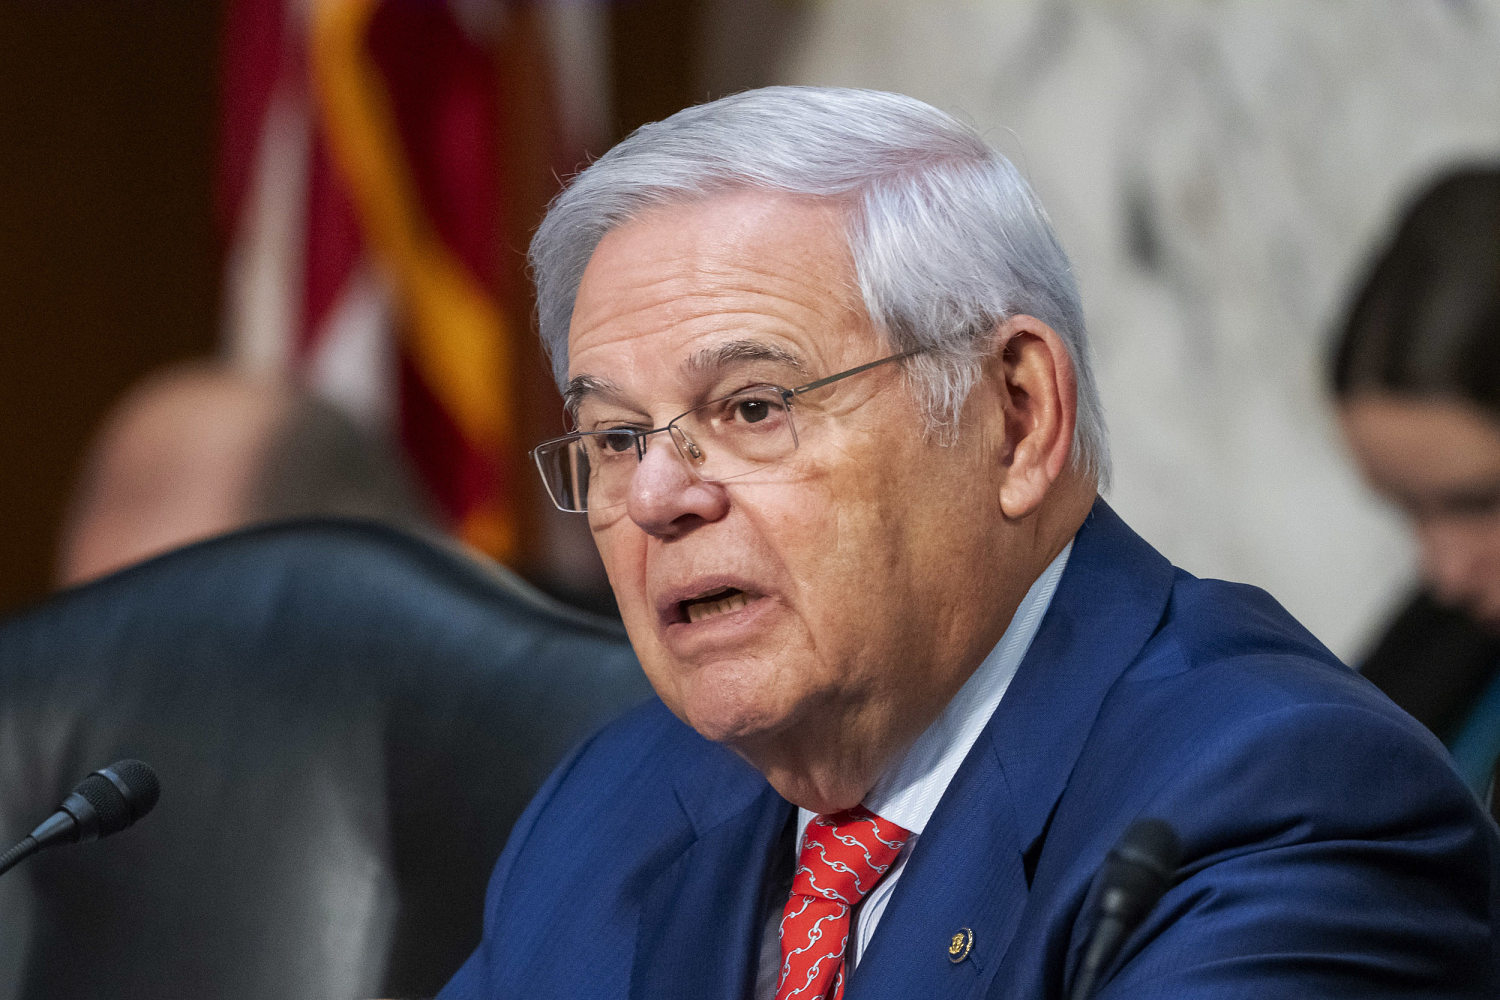 Bob Menendez claims 'persecution' in Senate floor remarks after latest allegations